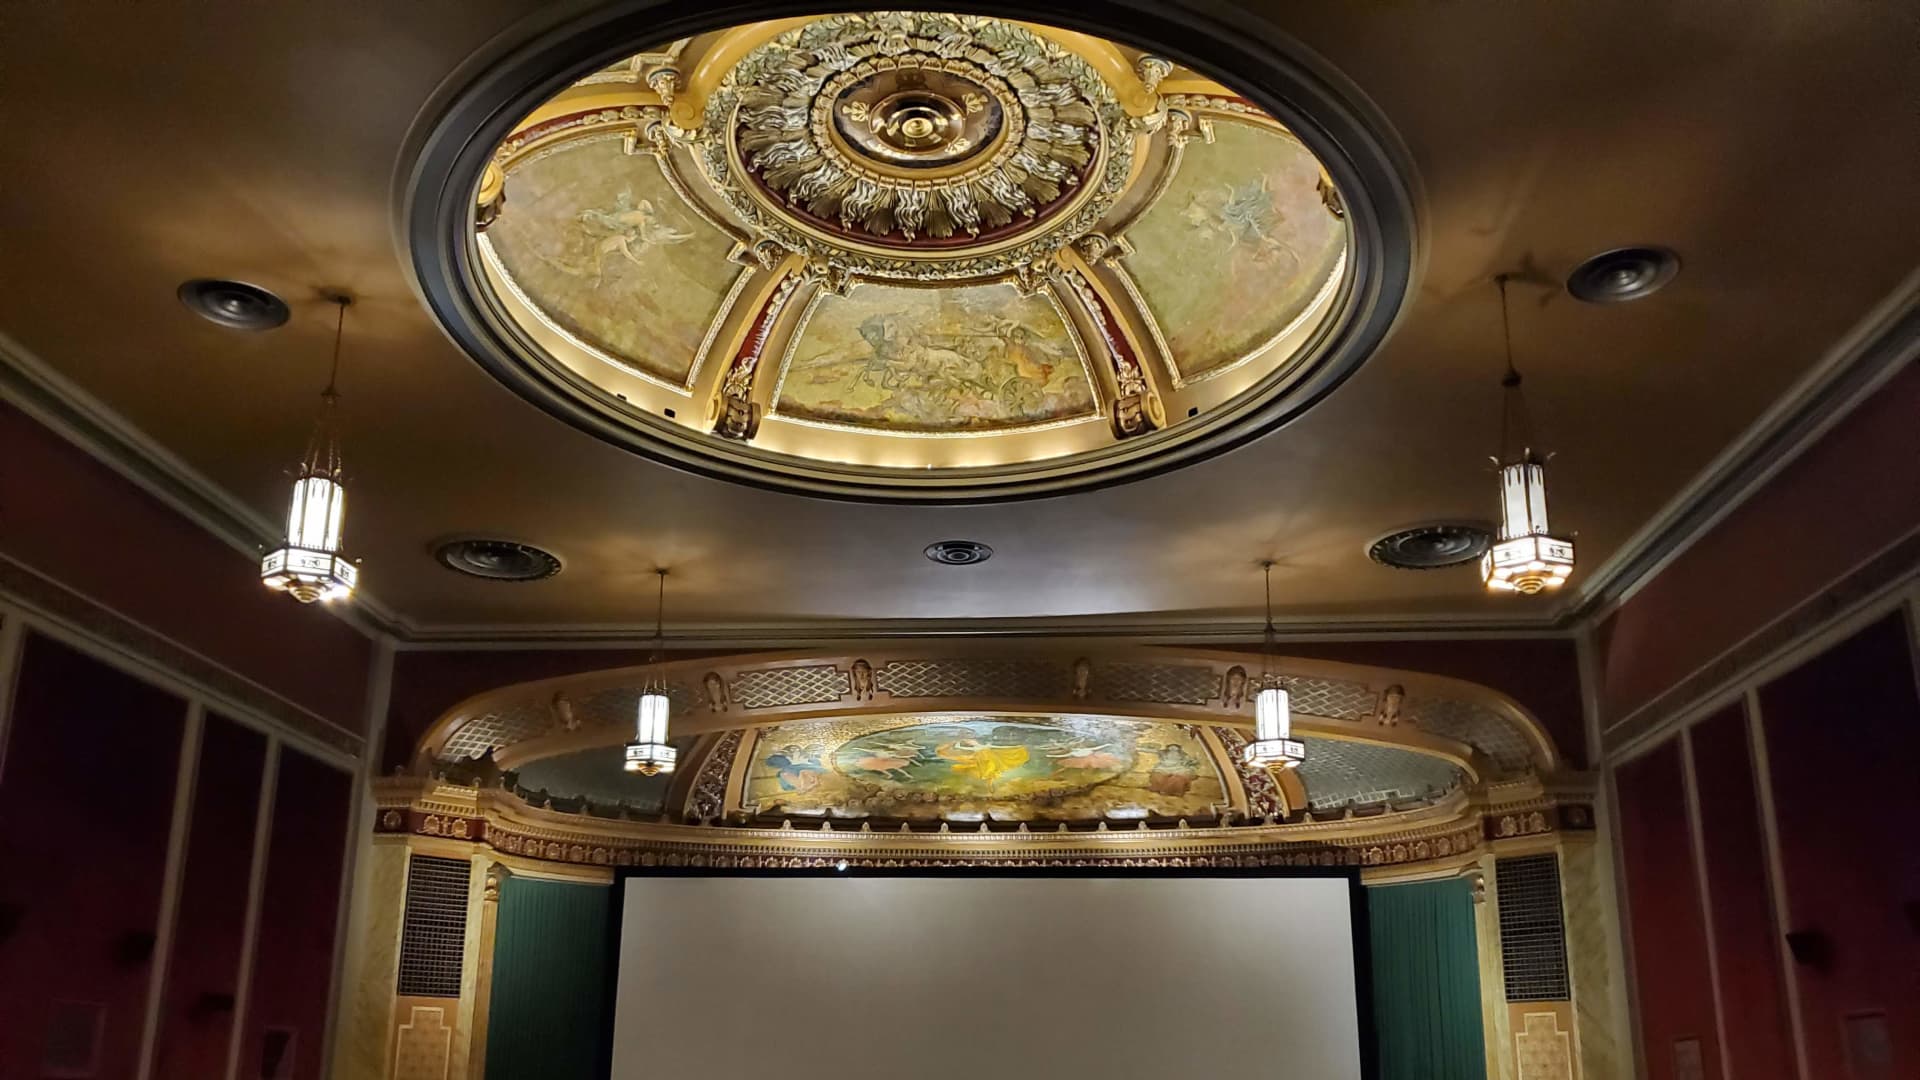 The North Park Theatre in Buffalo, New York, is a historic movie theater that has been in business for a century. It is waiting on aid from the SBA's Shuttered Venue Operators Grant Program.